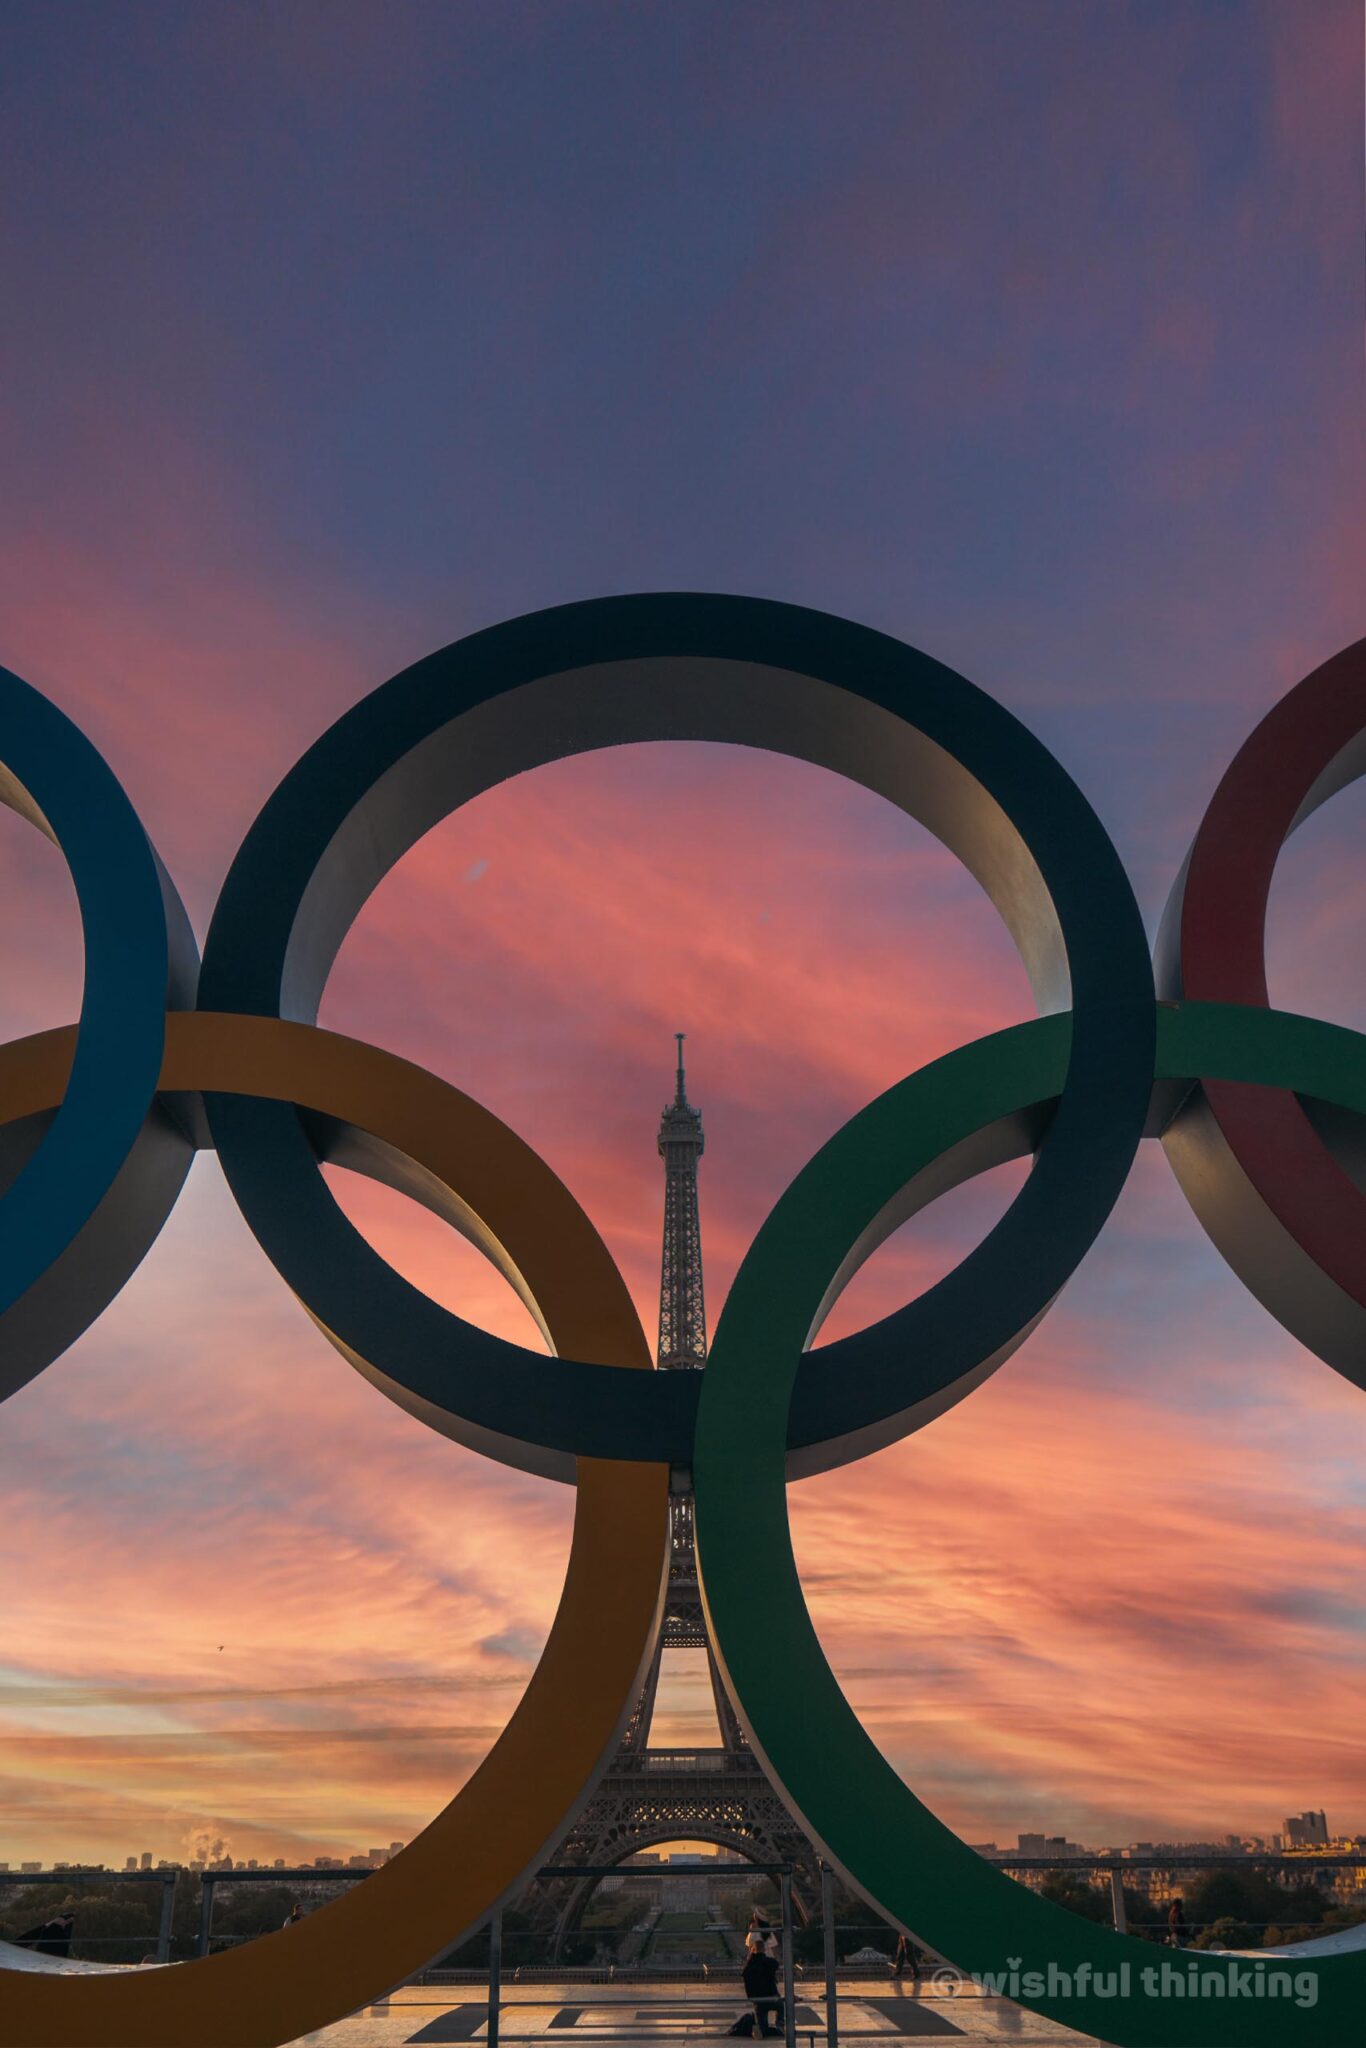 During a pink-hued sunset, the Paris 2024 Olympic Rings frame the silhouette of the Eiffel Tower as Paris prepares for the Olympic and Paralympic Games